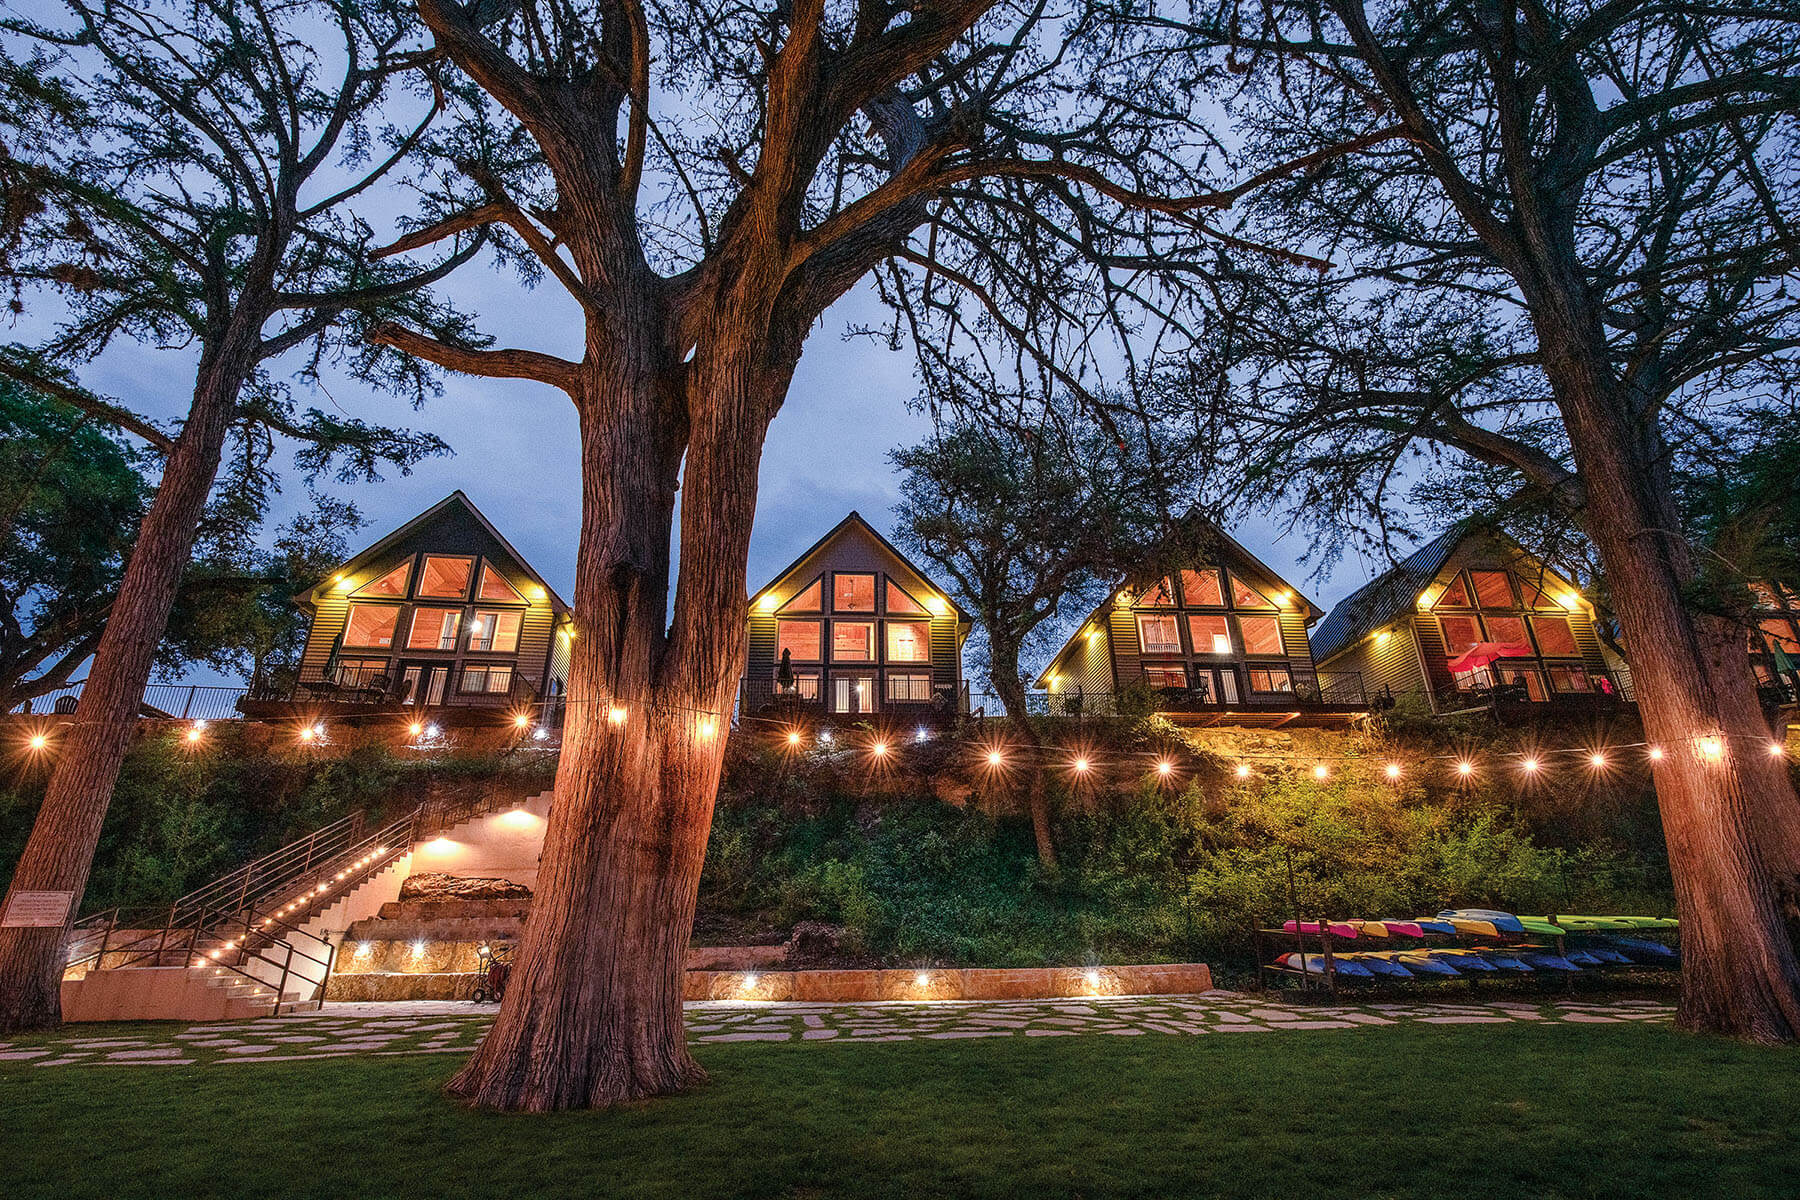 A large lodge with golden string lights under tall trees